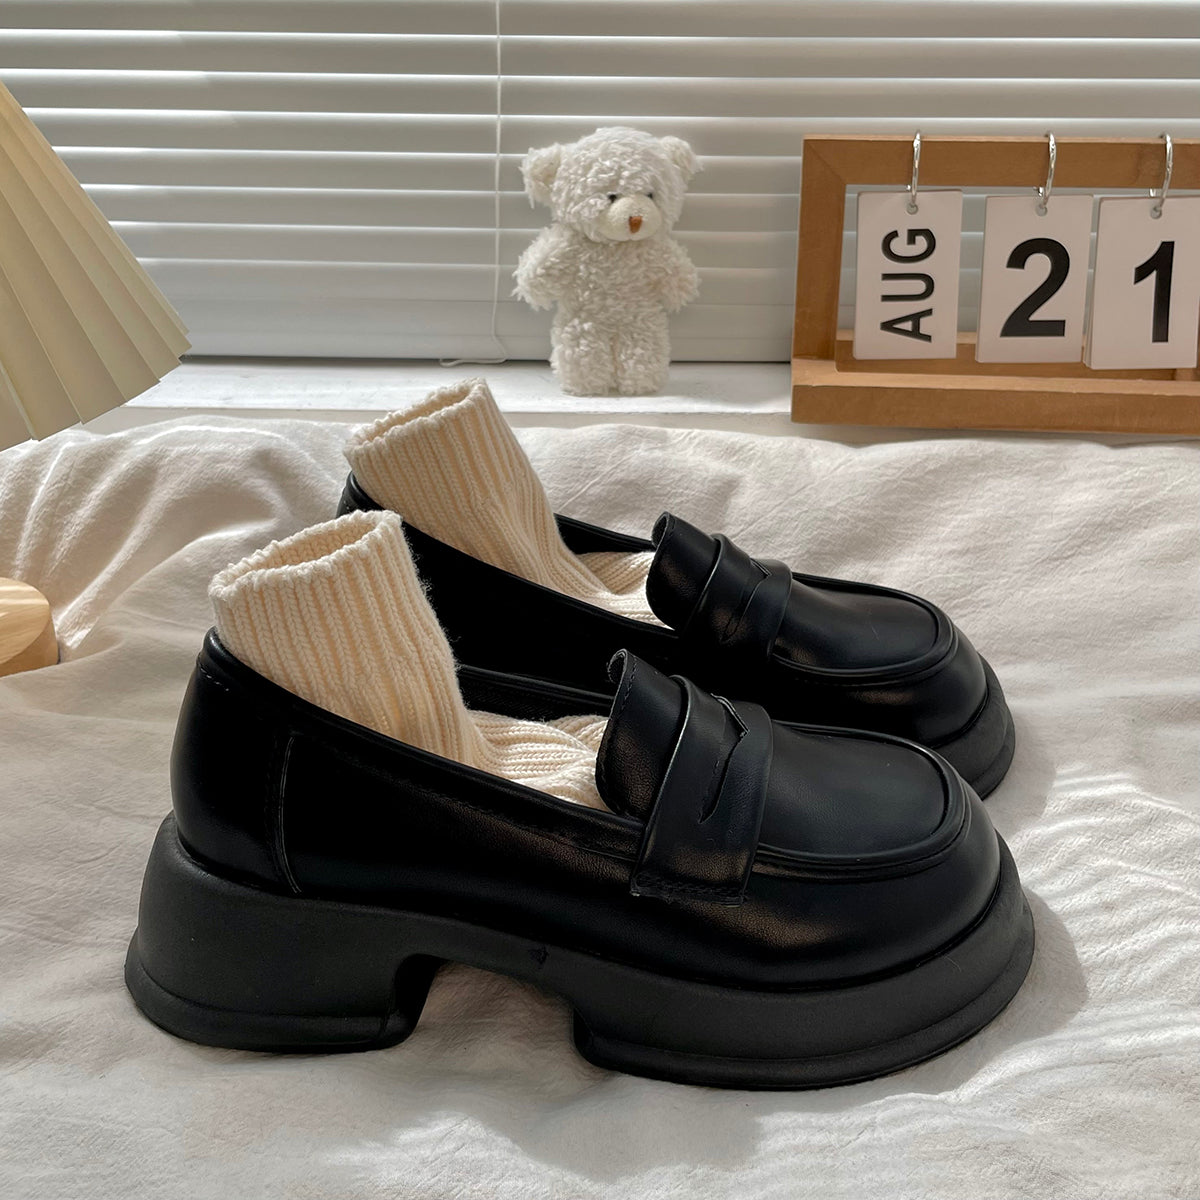 Collegiate Chic Thic Bottom Loafers